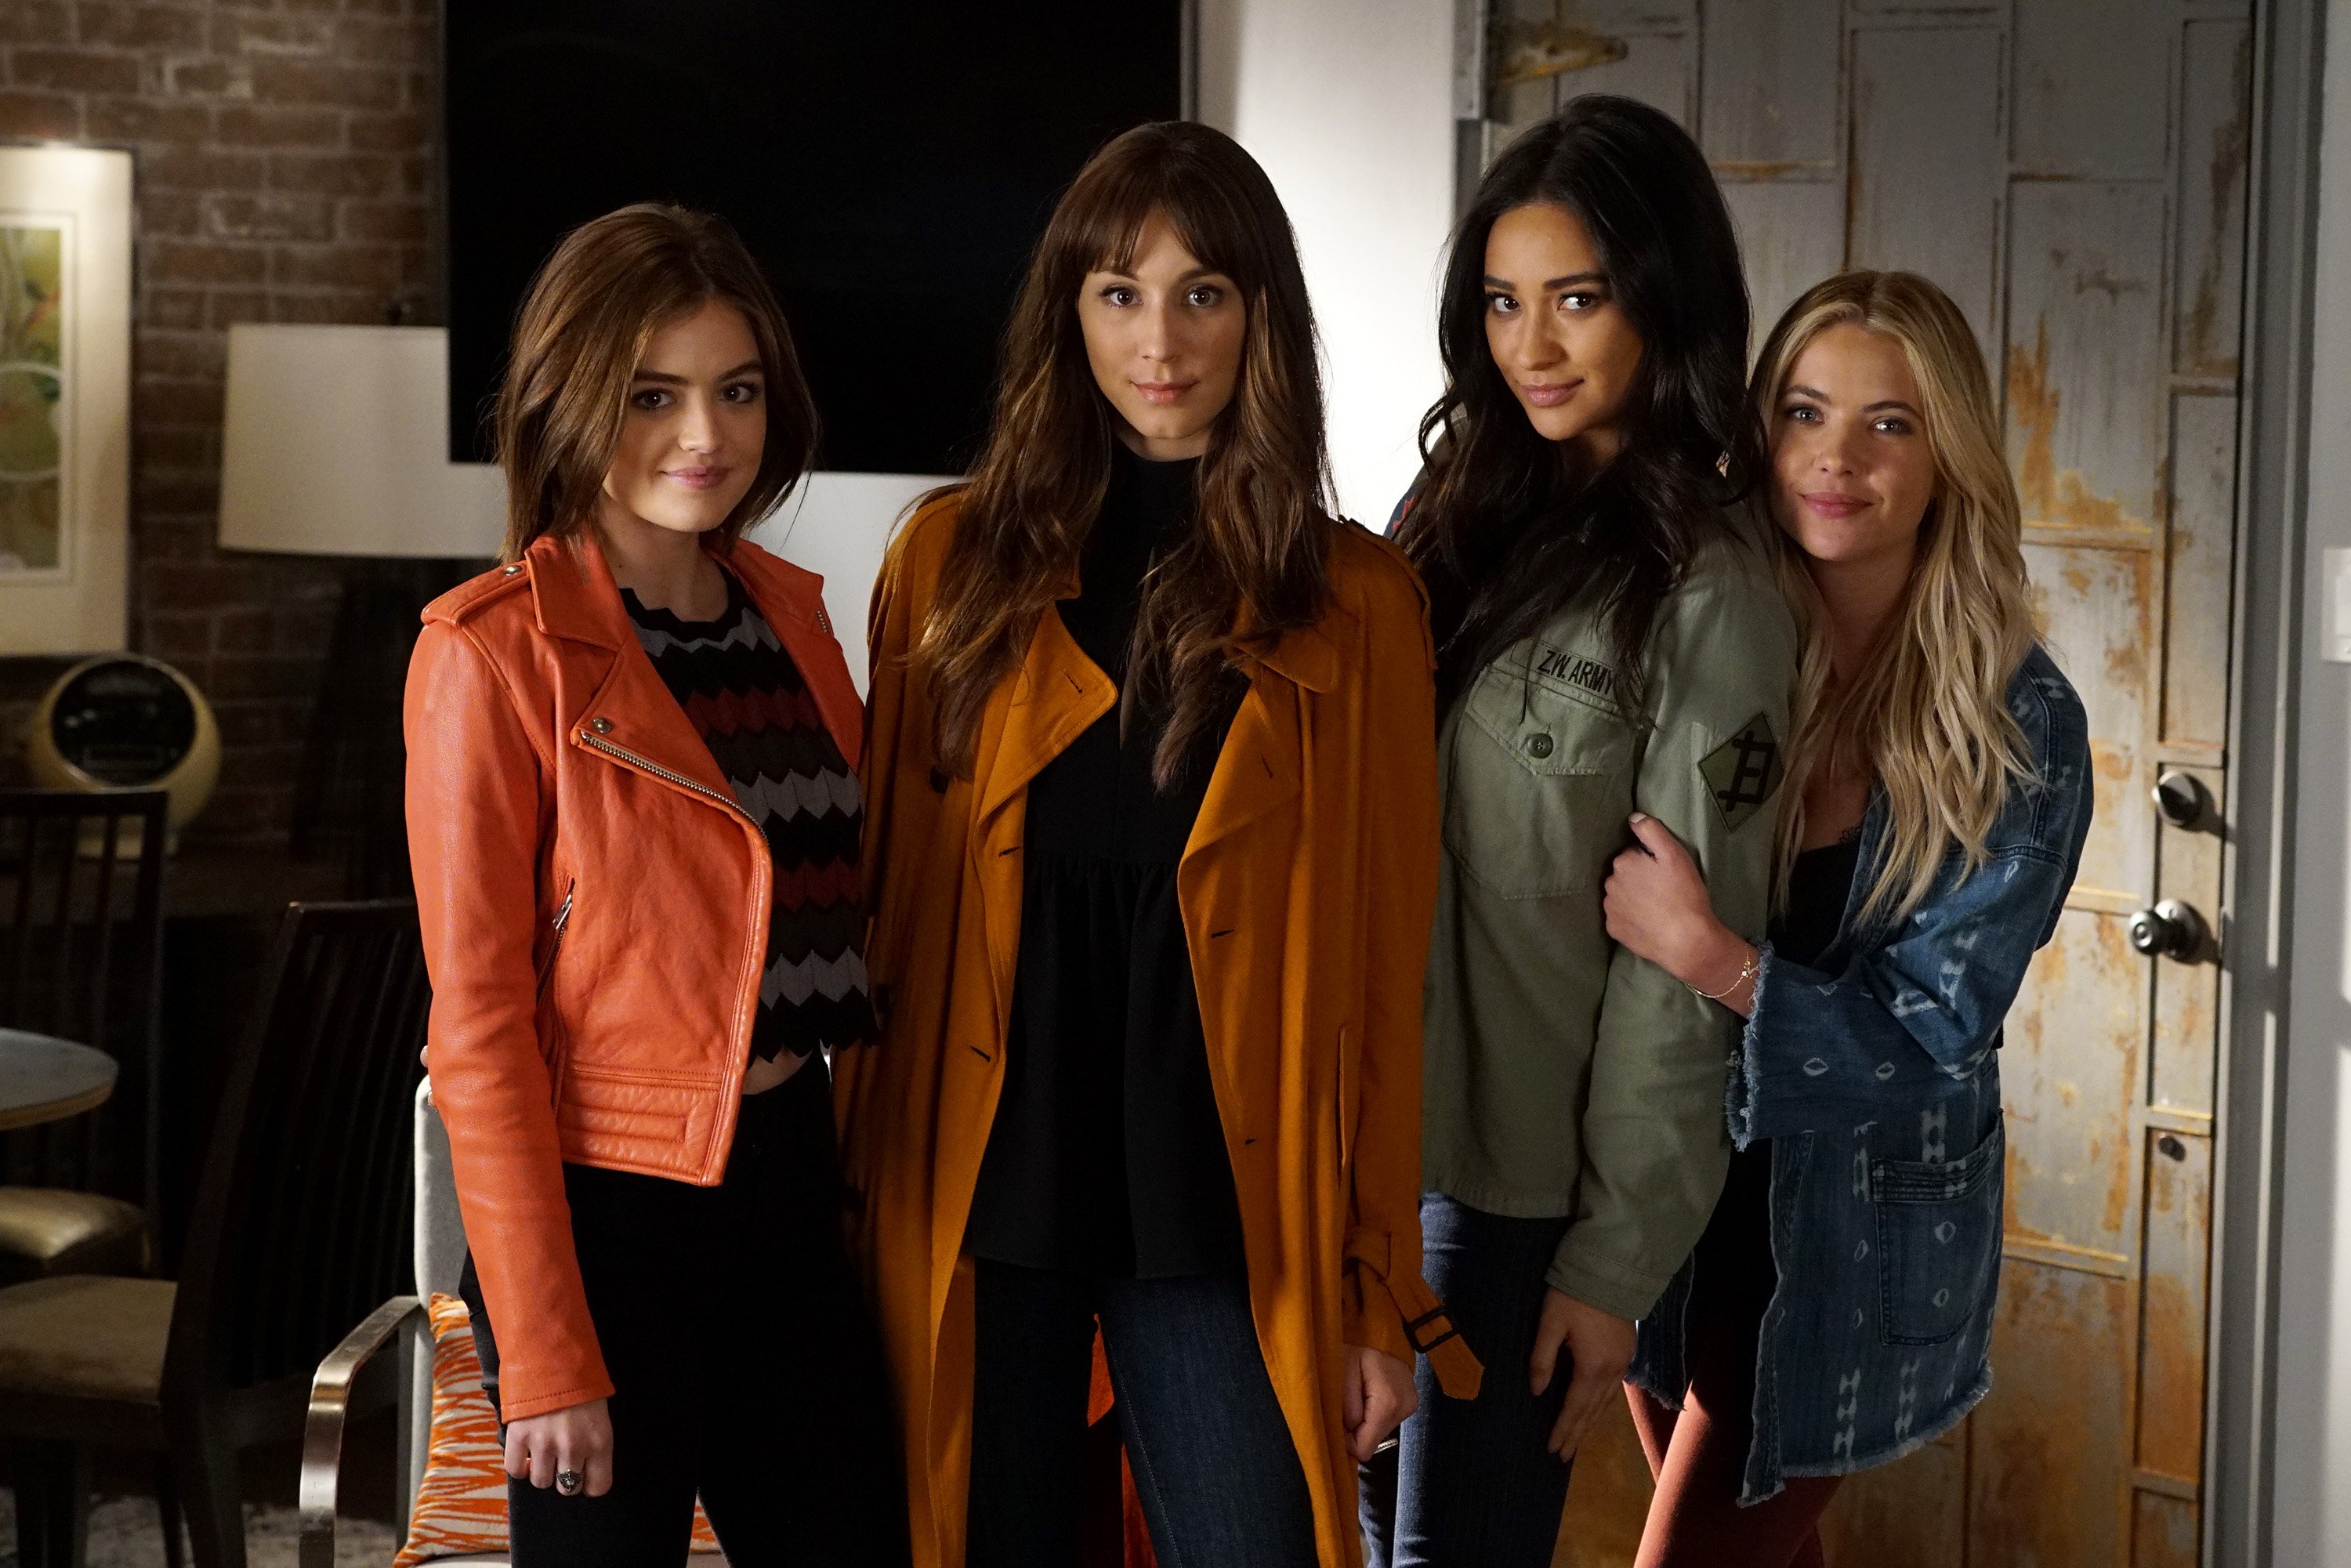 Shay Mitchell & Troian Bellisario Both Auditioned for ‘PLL’ Because of 1 Scene That Got Cut Out